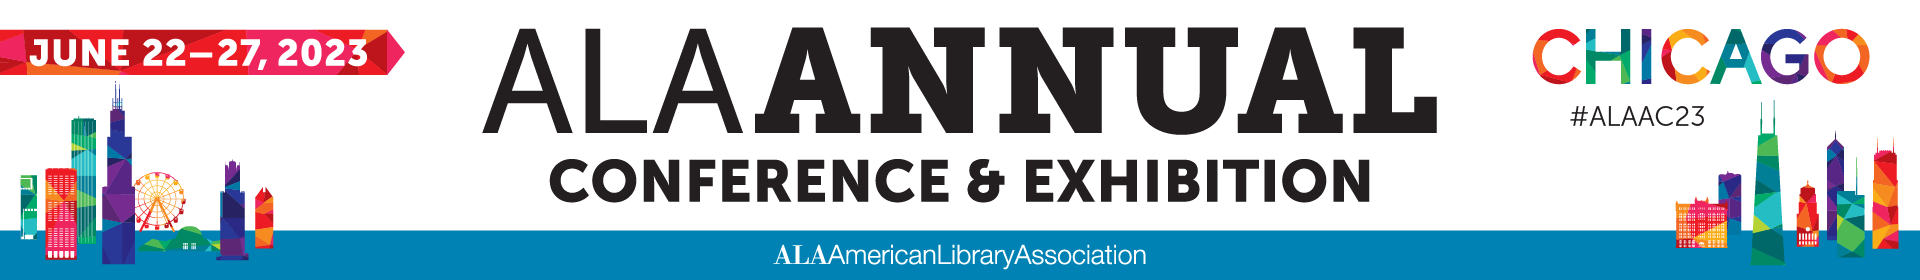 ALA Annual Conference & Exhibition | June 22-27, 2023 | Chicago | #alaac22